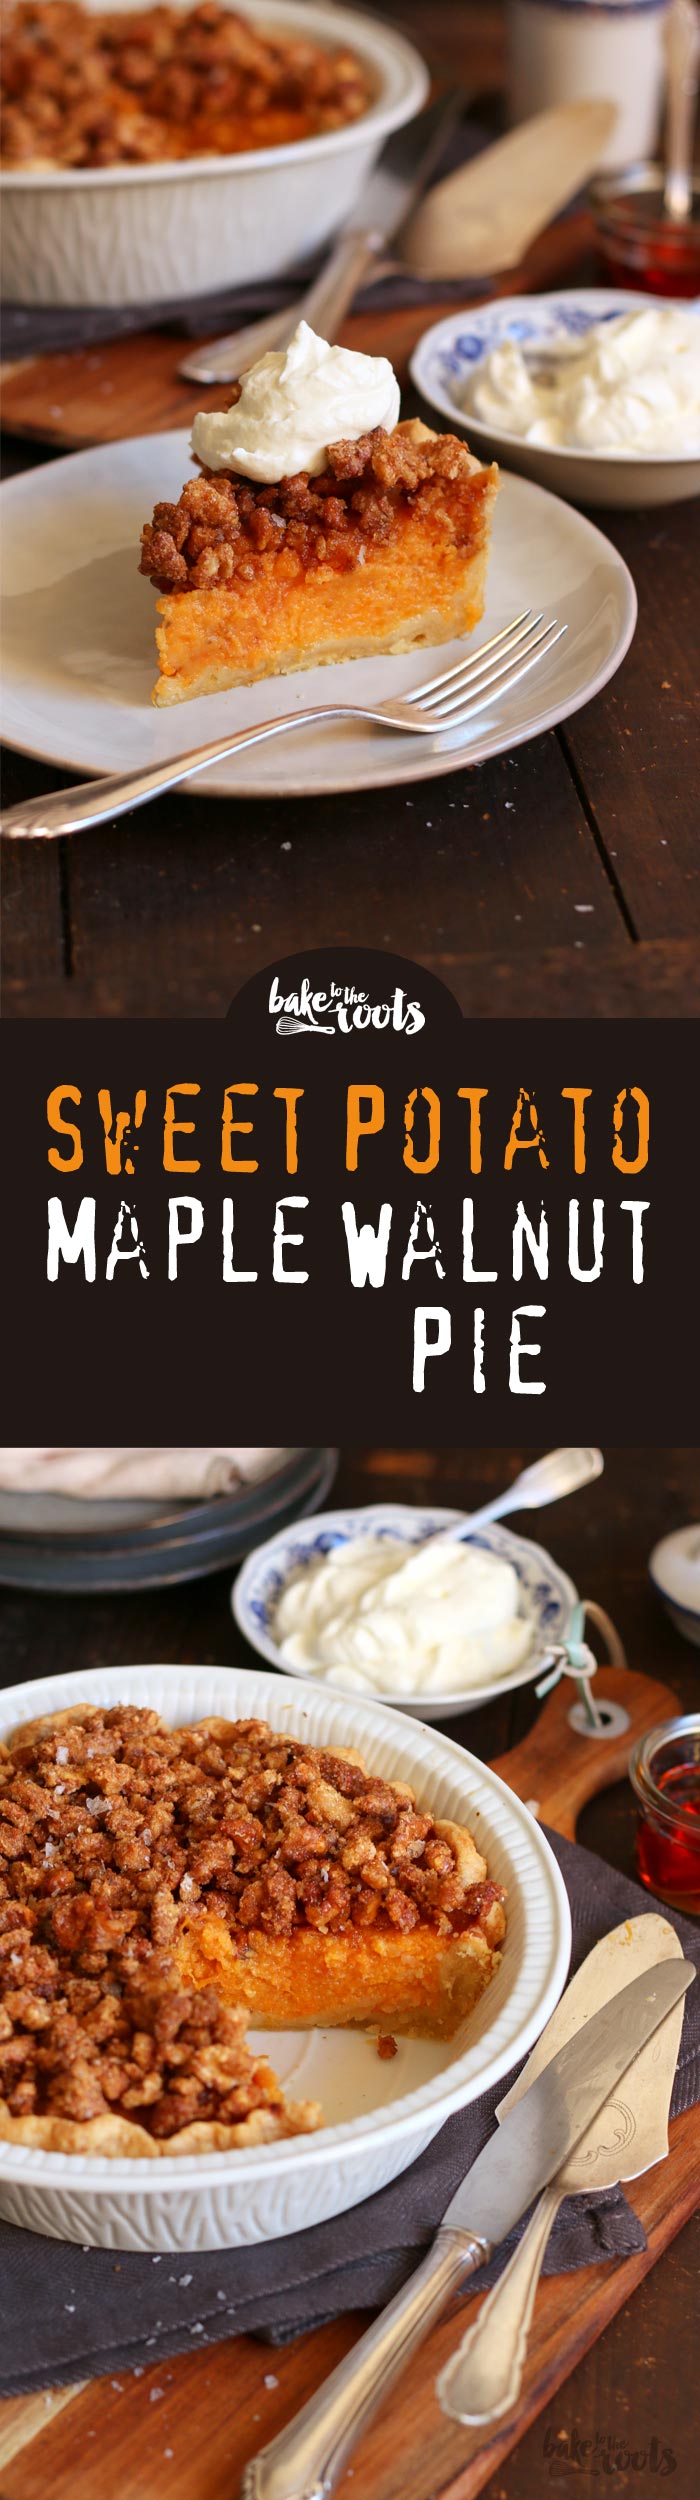 Delicious Sweet Potato Pie with Maple Glazed Walnuts and Sweet Streusel | Bake to the roots